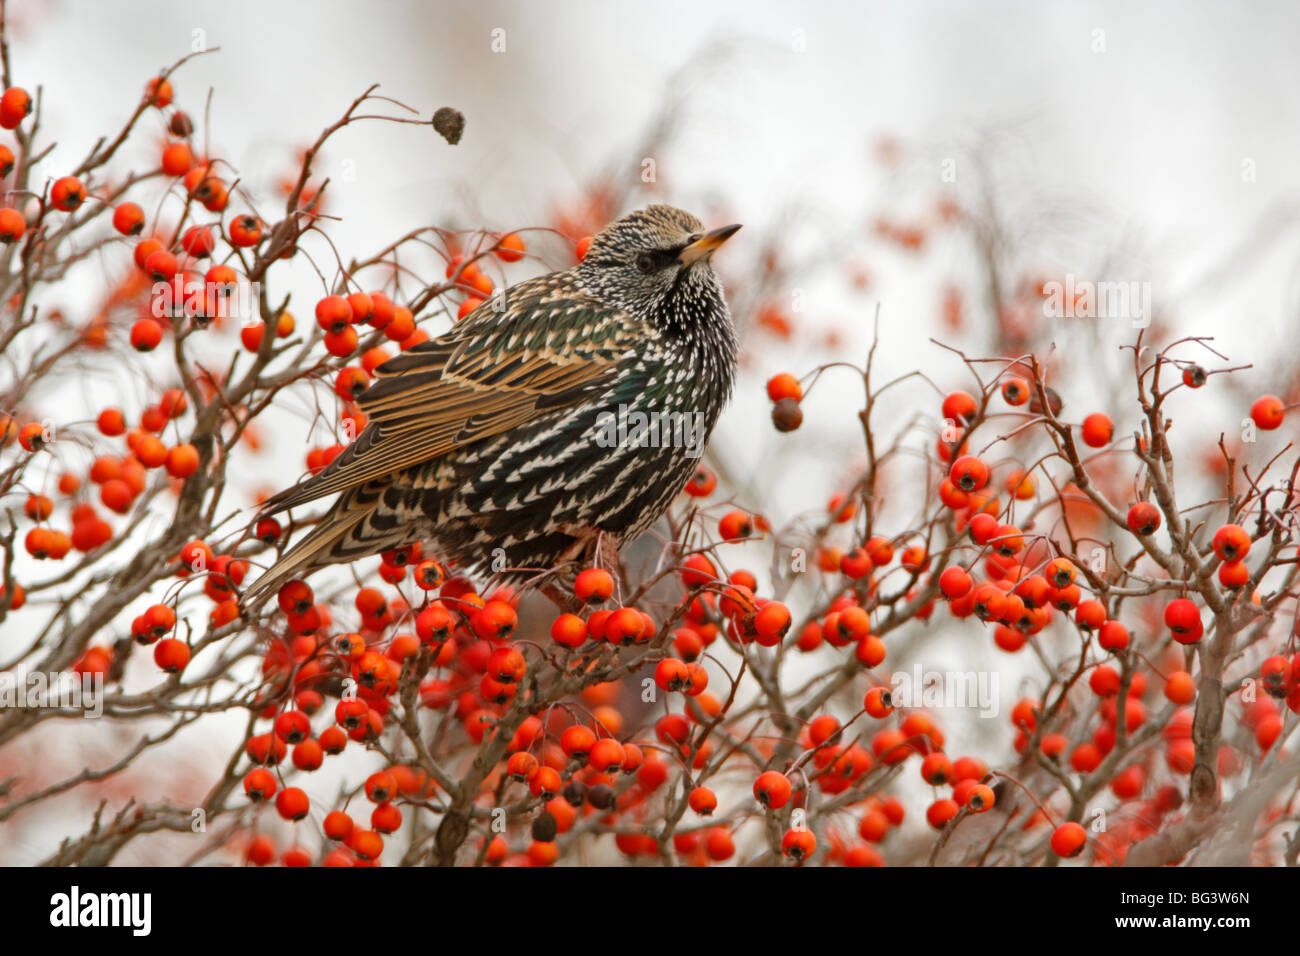 European Starling perched in Hawthorn berries Stock Photo